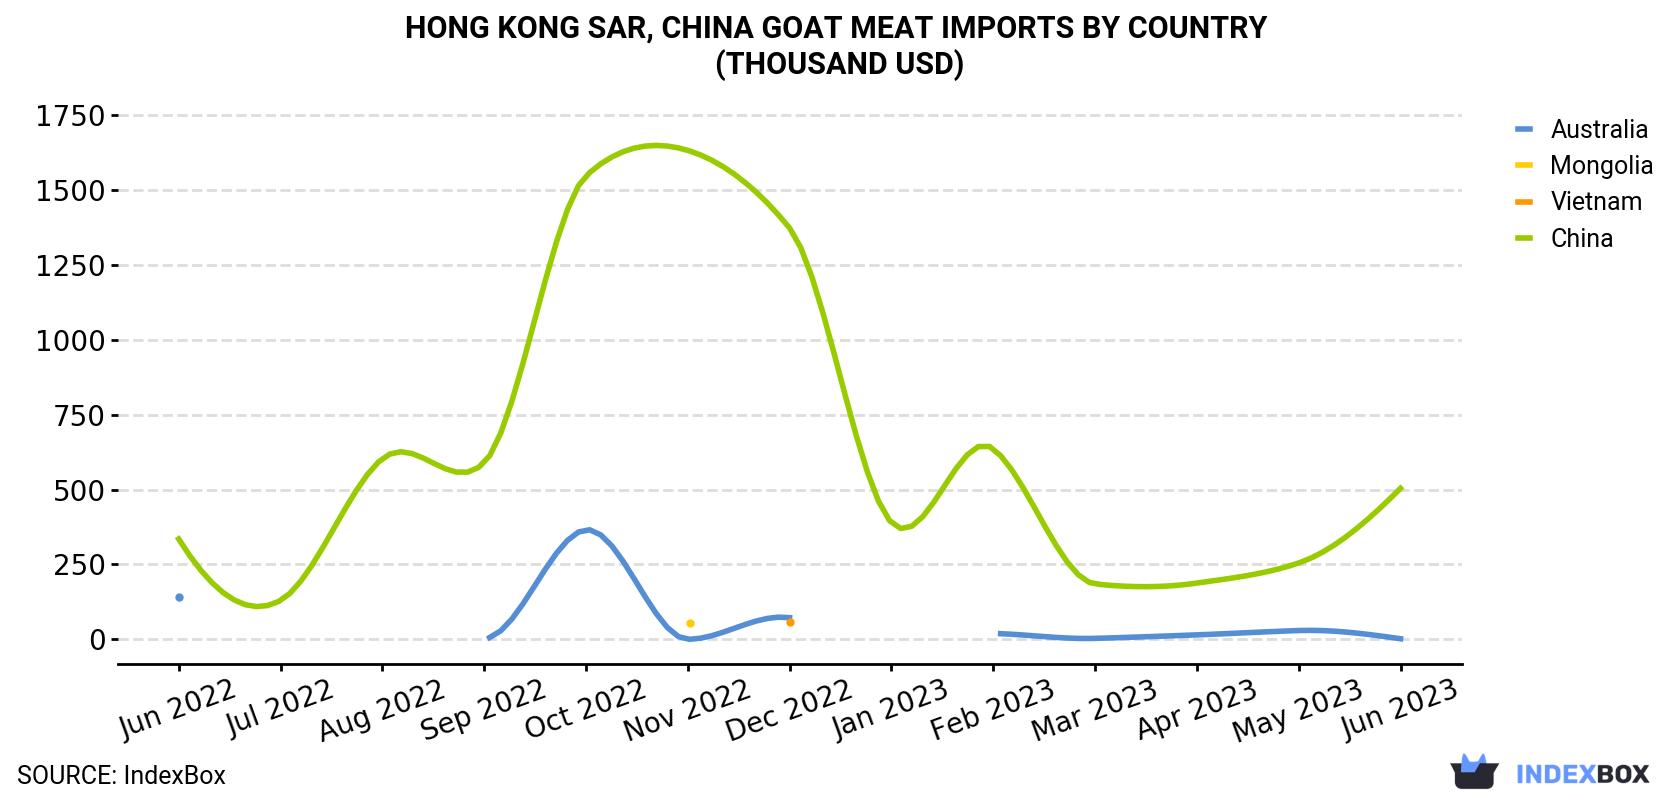 Hong Kong Goat Meat Imports By Country (Thousand USD)